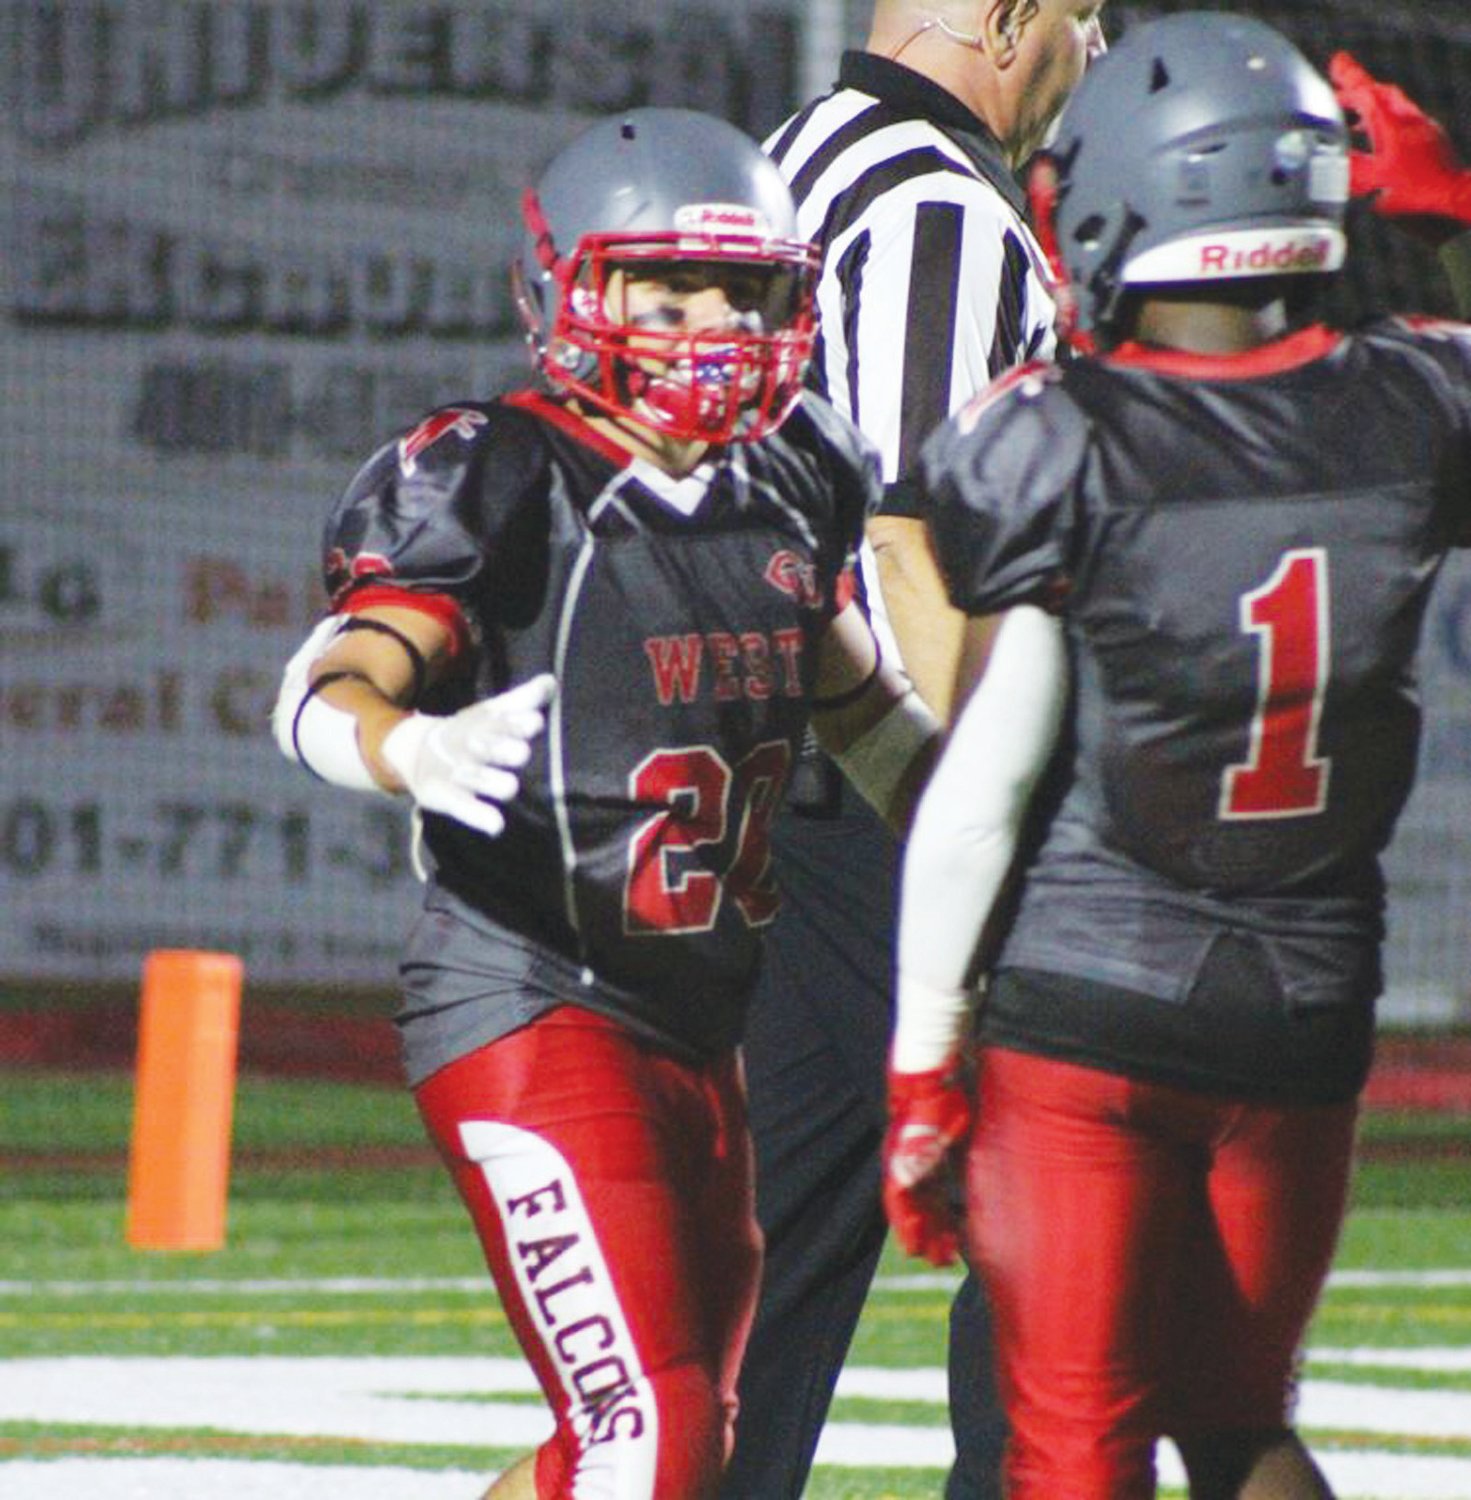 GETTING THE WIN: West’s Dimitri Leblanc (20) and Marcus Chung (1) celebrate.